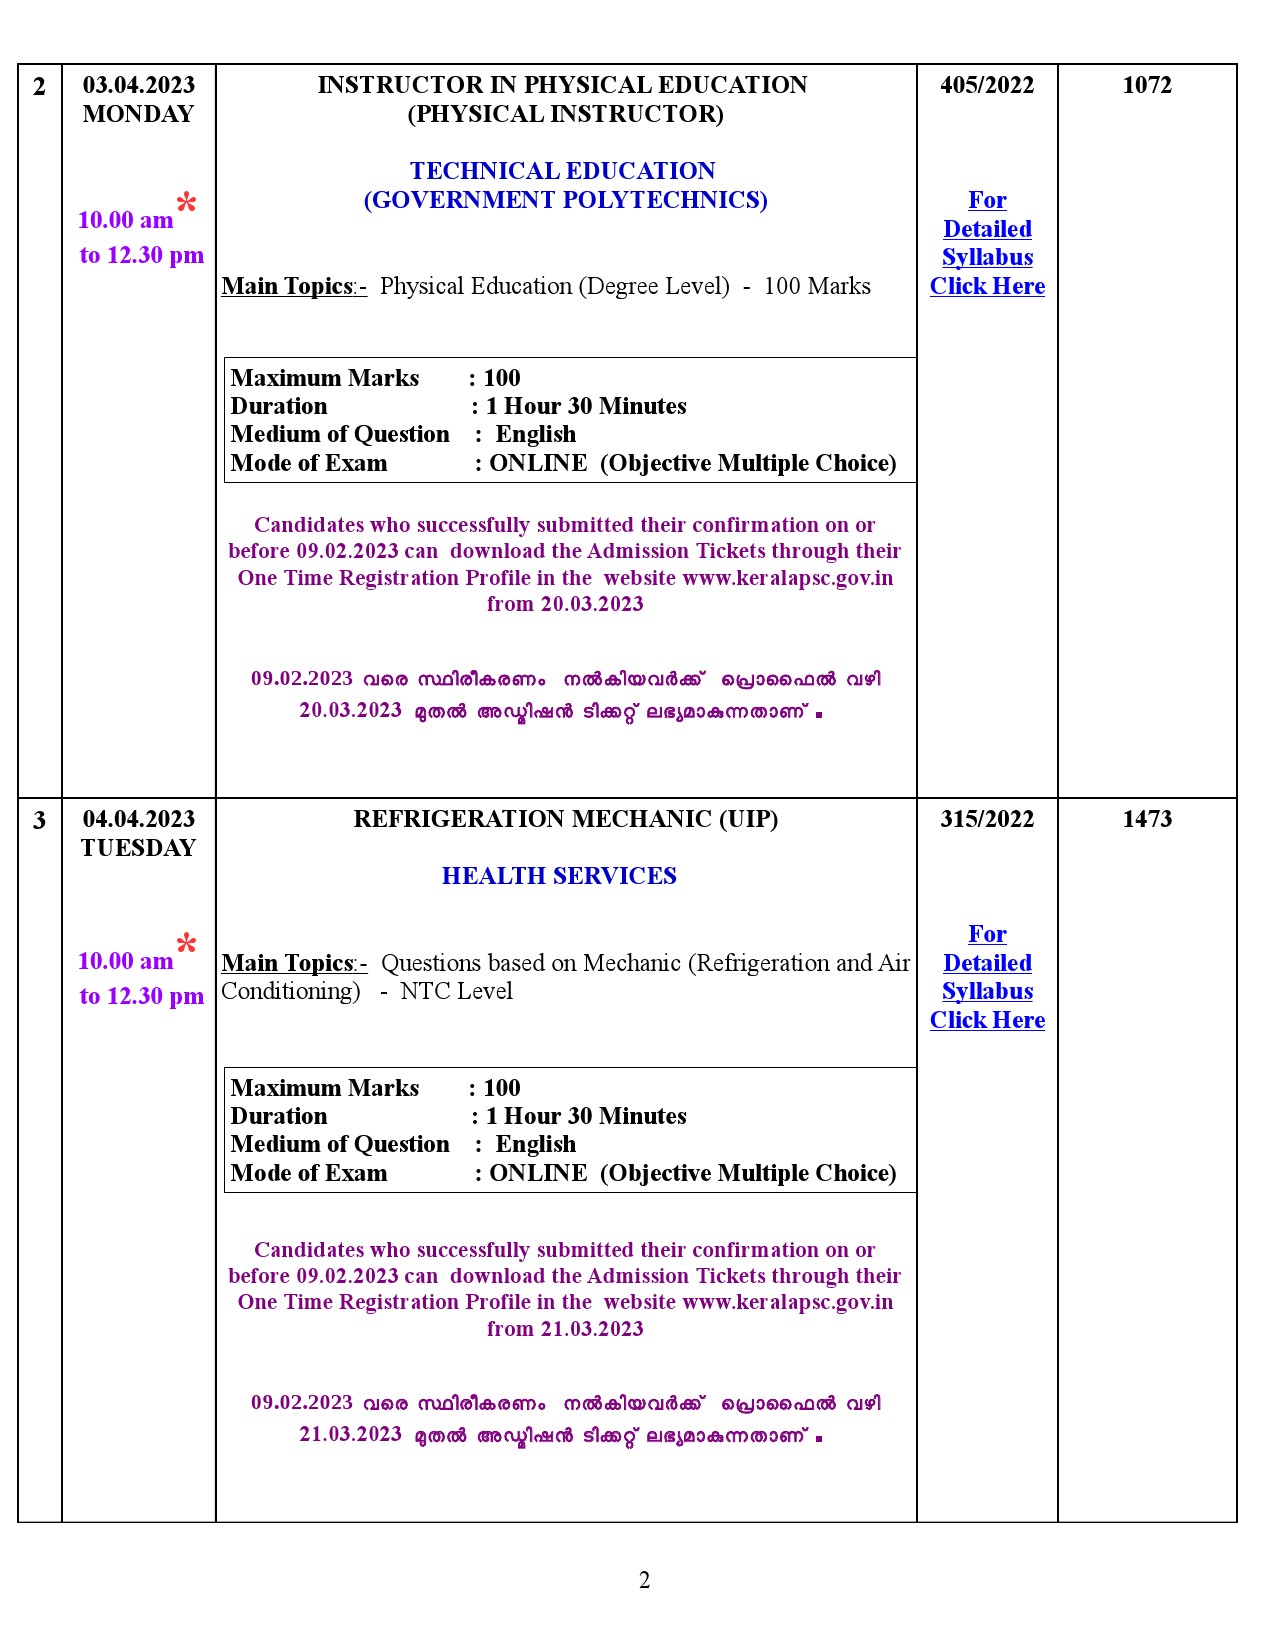 Examination Programme For The Month Of April 2023 - Notification Image 2